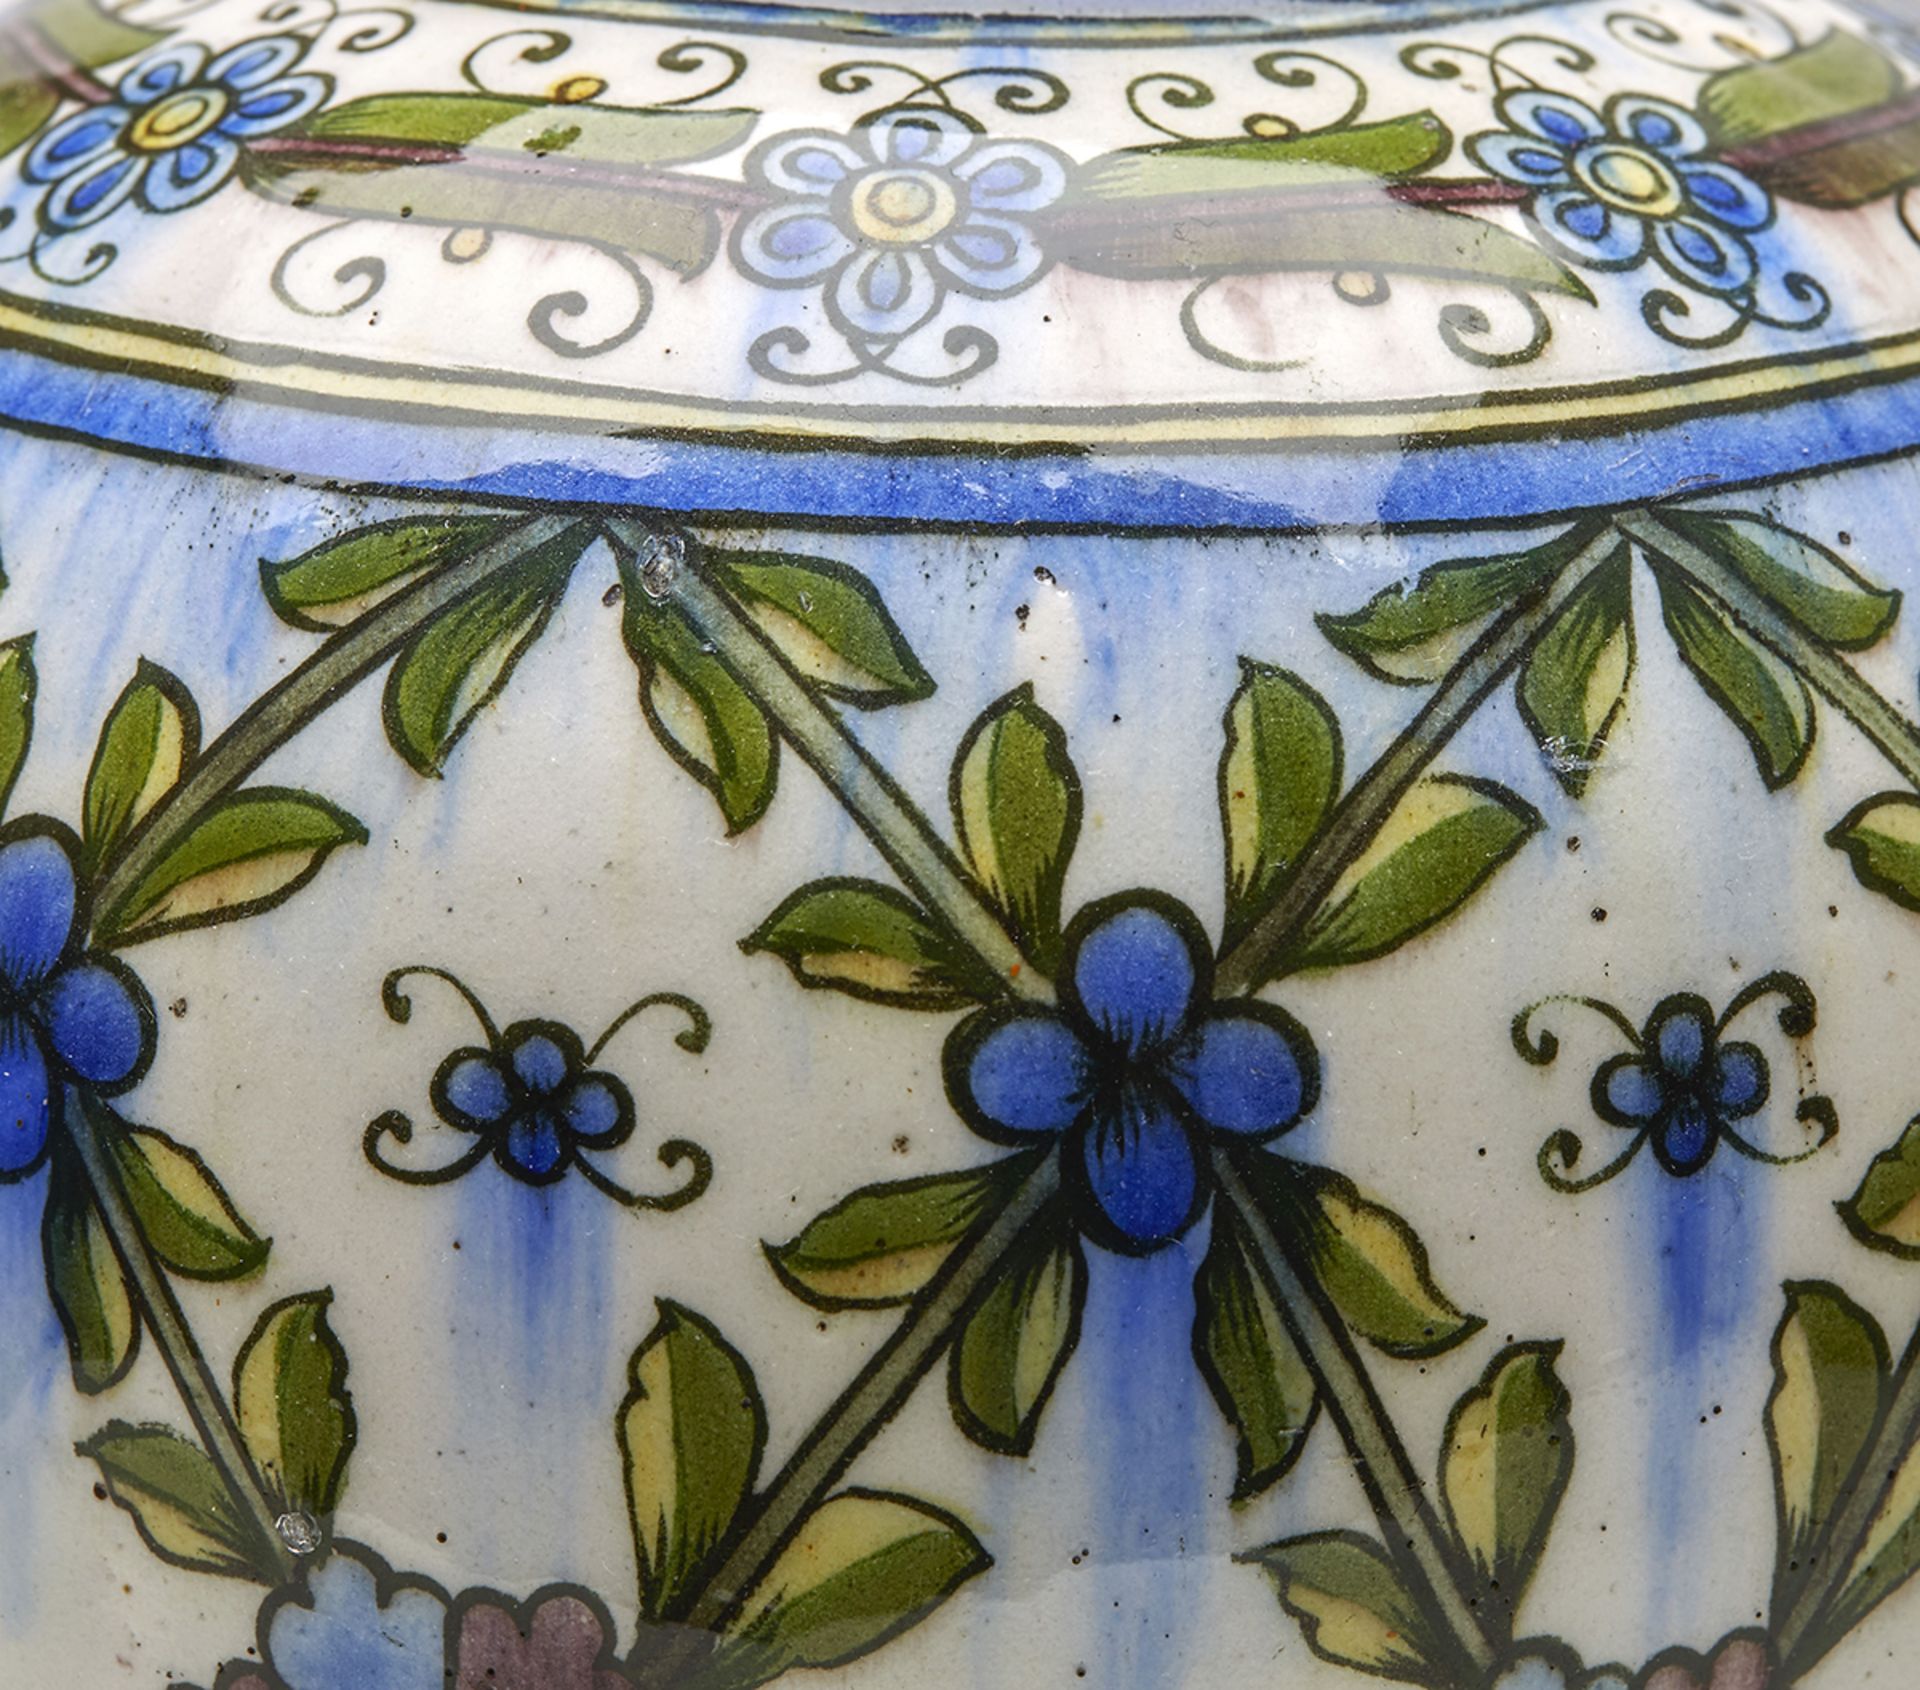 ANTIQUE PERSIAN FLORAL PAINTED BALUSTER FORM VASE, 19TH C.   DIMENSIONS   Height 28cm, Diameter 19, - Image 3 of 8